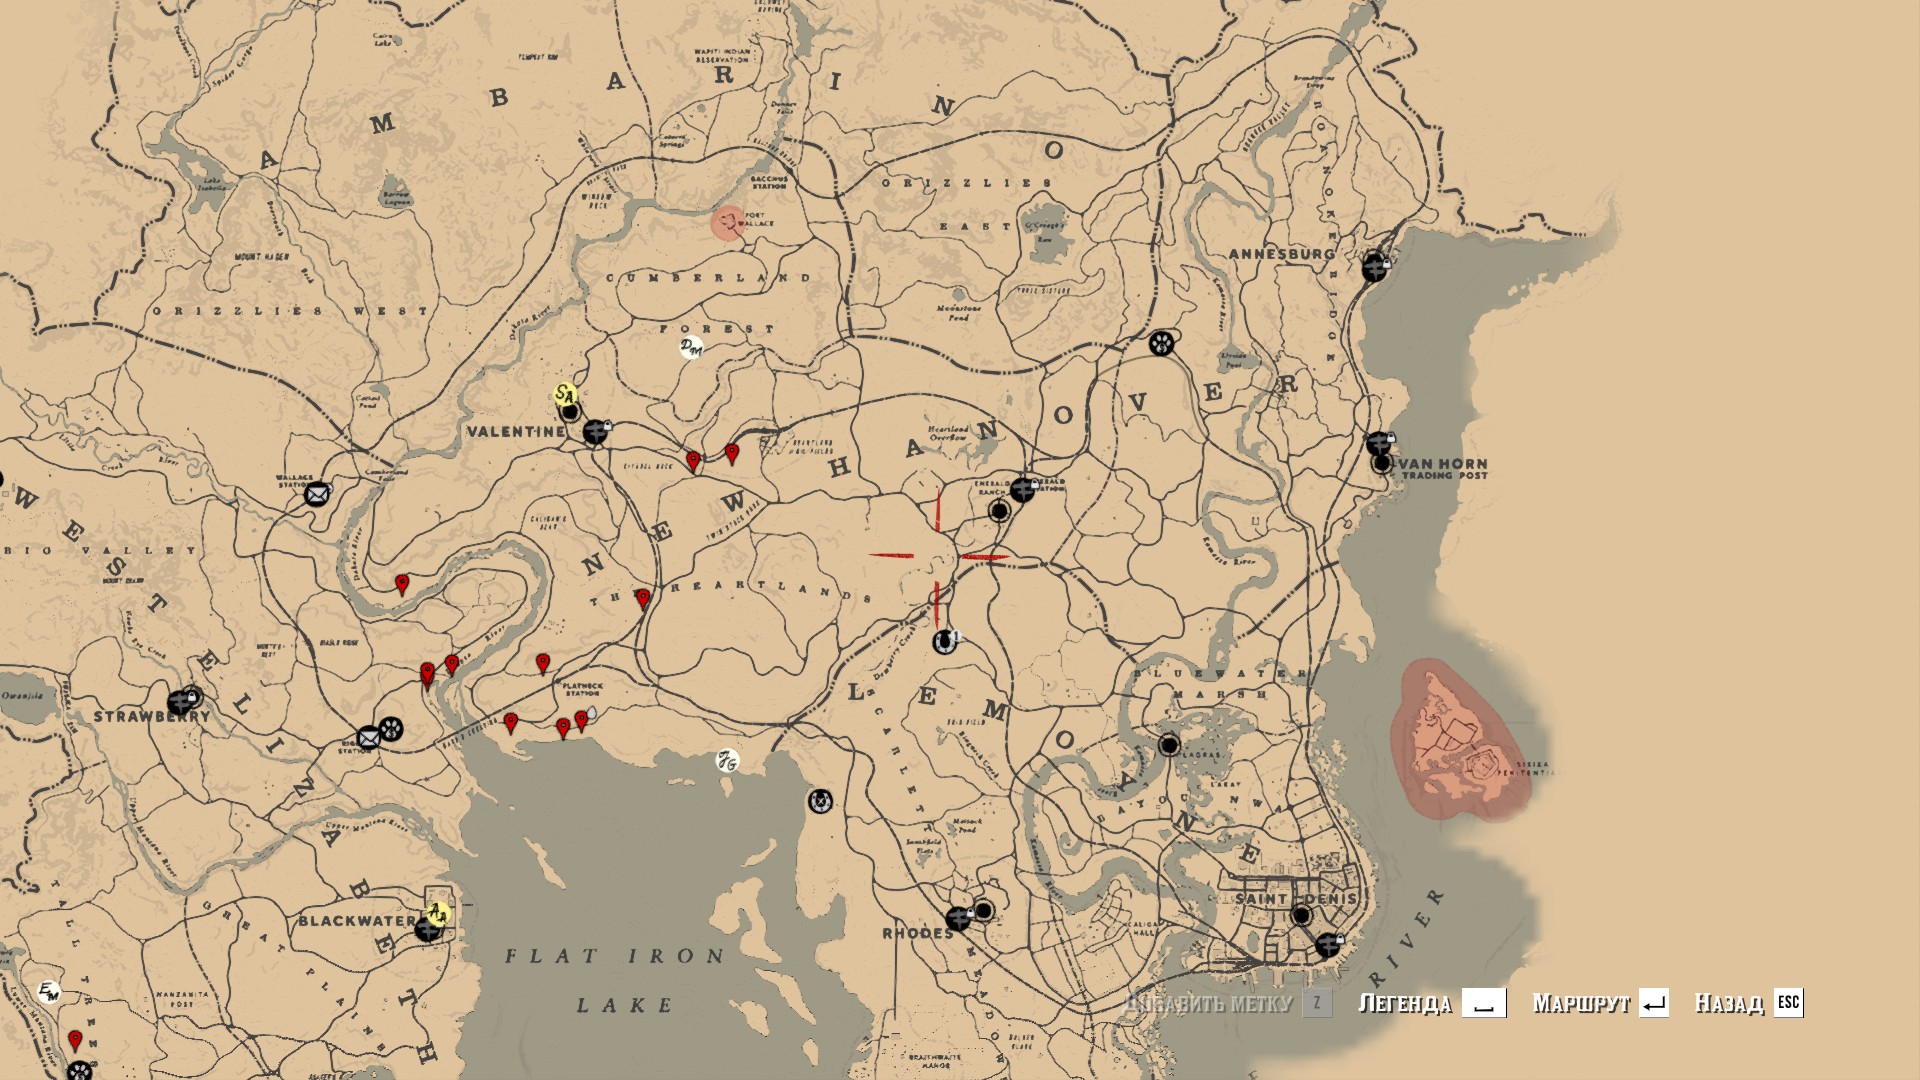 Red Dead Redemption 2 - Mint and Creeping Thyme Map Locations - Mint and Creeping thyme locations (that I found) - 6926648